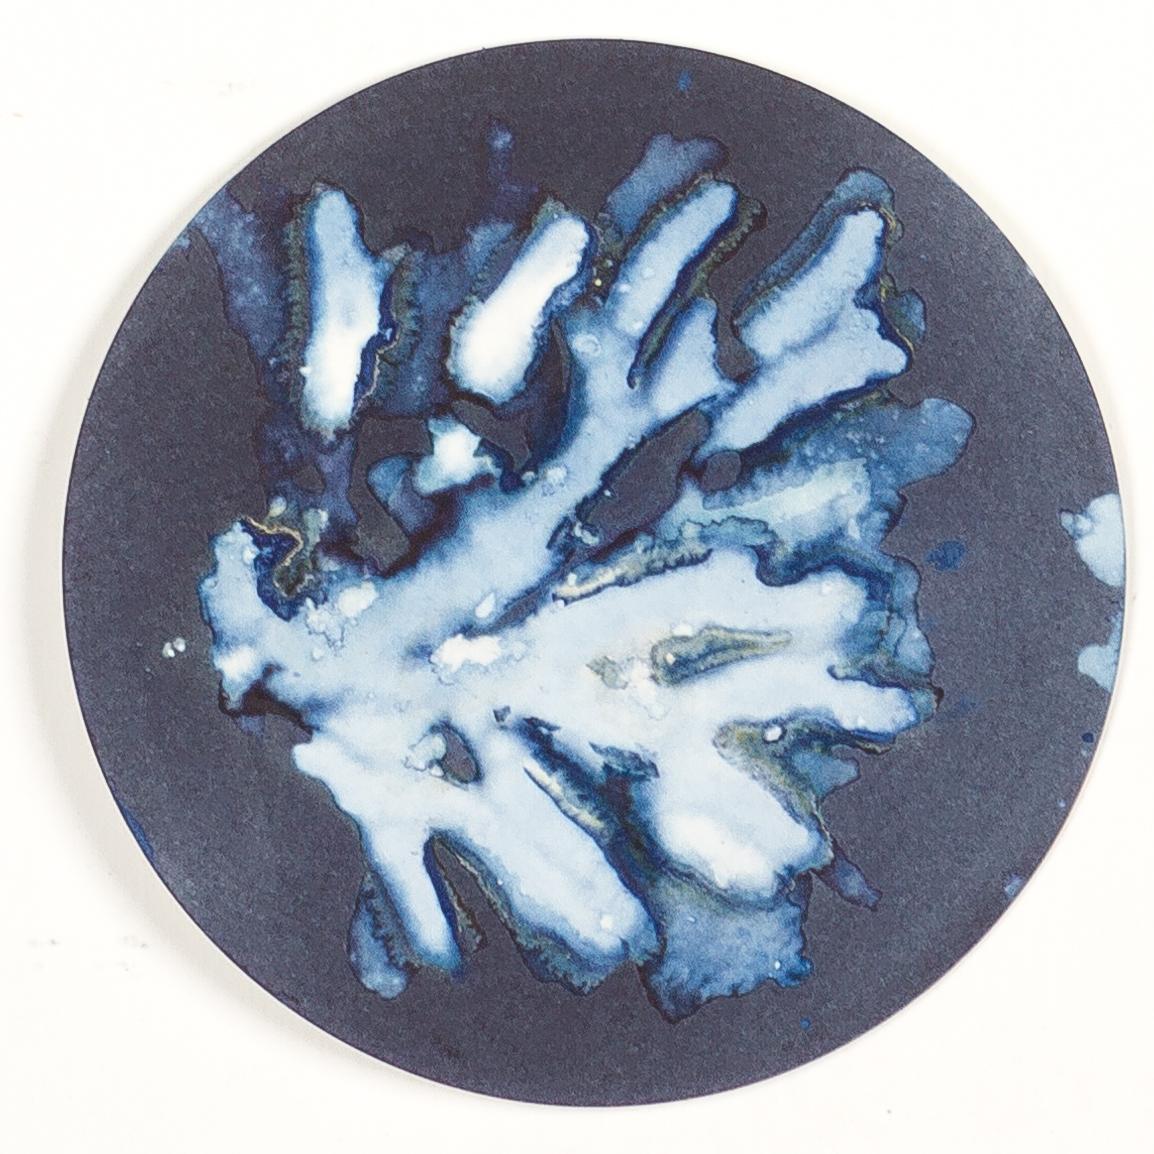 Algas 14, 41 y 68. Cyanotype photograhs mounted in high resistance glass dish For Sale 1